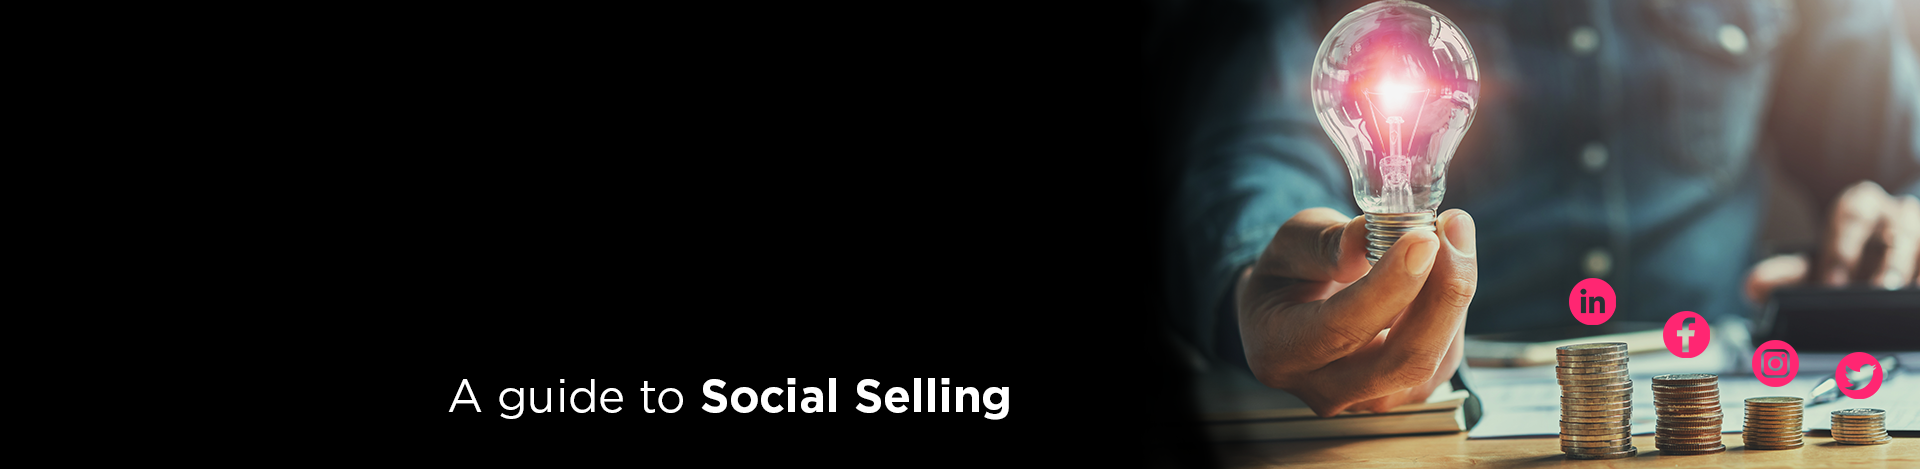 A guide to social selling